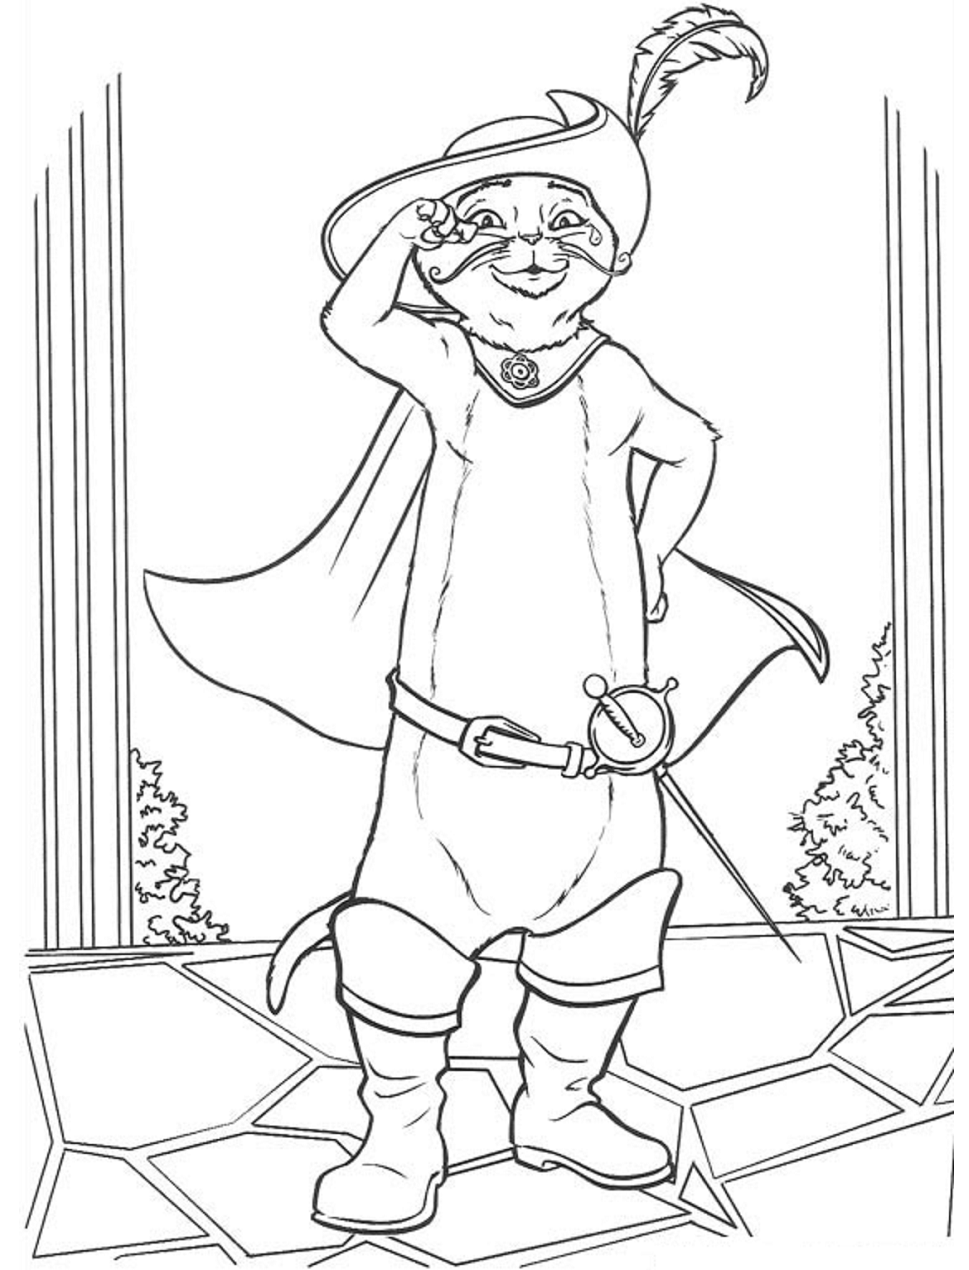 Cool Puss In Boots Coloring Page - Free Printable Coloring Pages for Kids